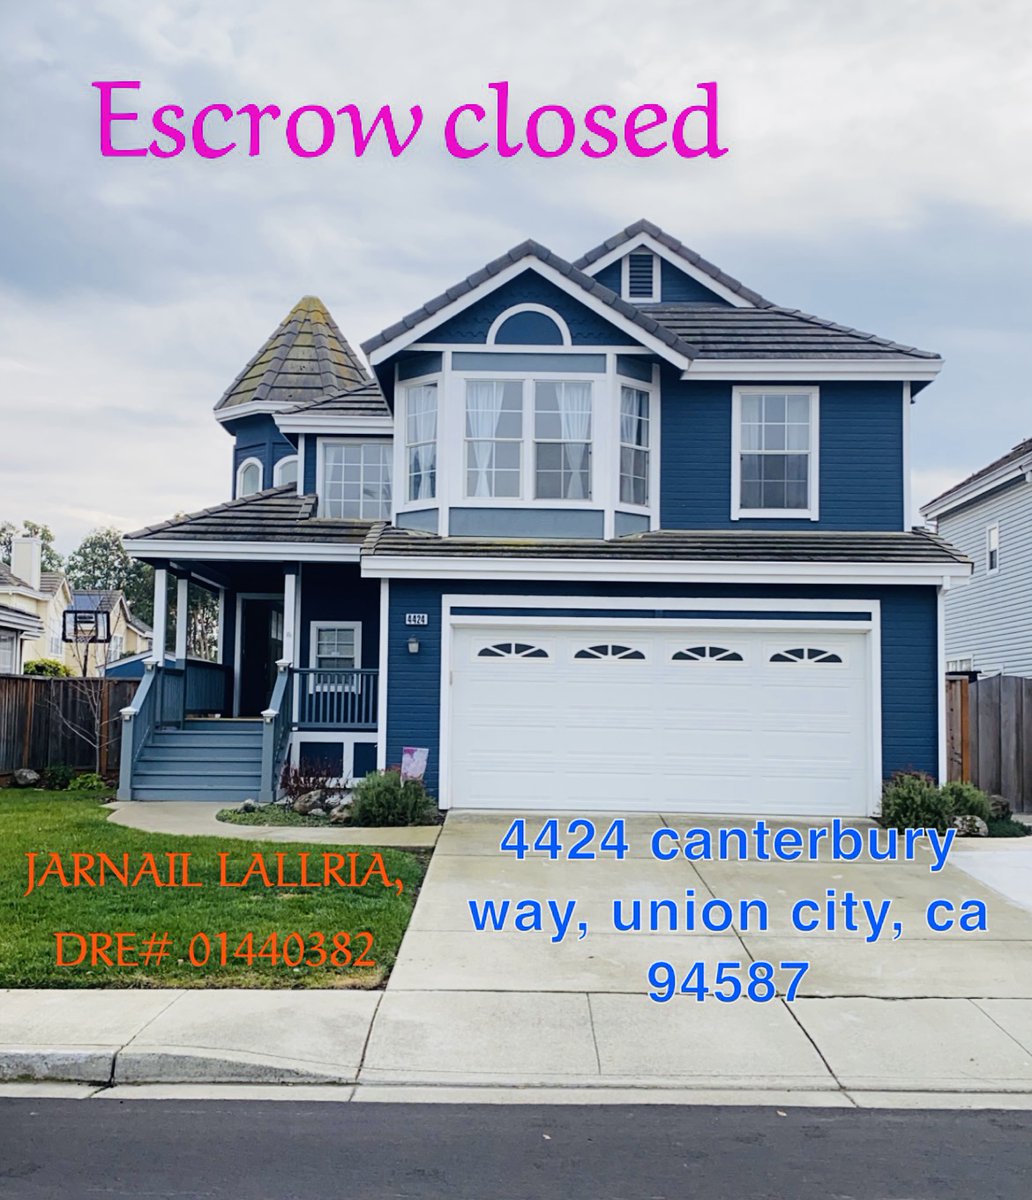 Escrow Closed, Time to give KEYS 🗝🗝 4424 Canterbury Way, Union City, CA 94587
Jarnail Lallria, DRE# 01440382
#realtor #happybuyer #happyfamily #buyeragent #lallriarealestate #firsttimebuyer #dreamhome🏡 #hothomes  #realestate #sellingcalifornia #realtorlife #realestateagent